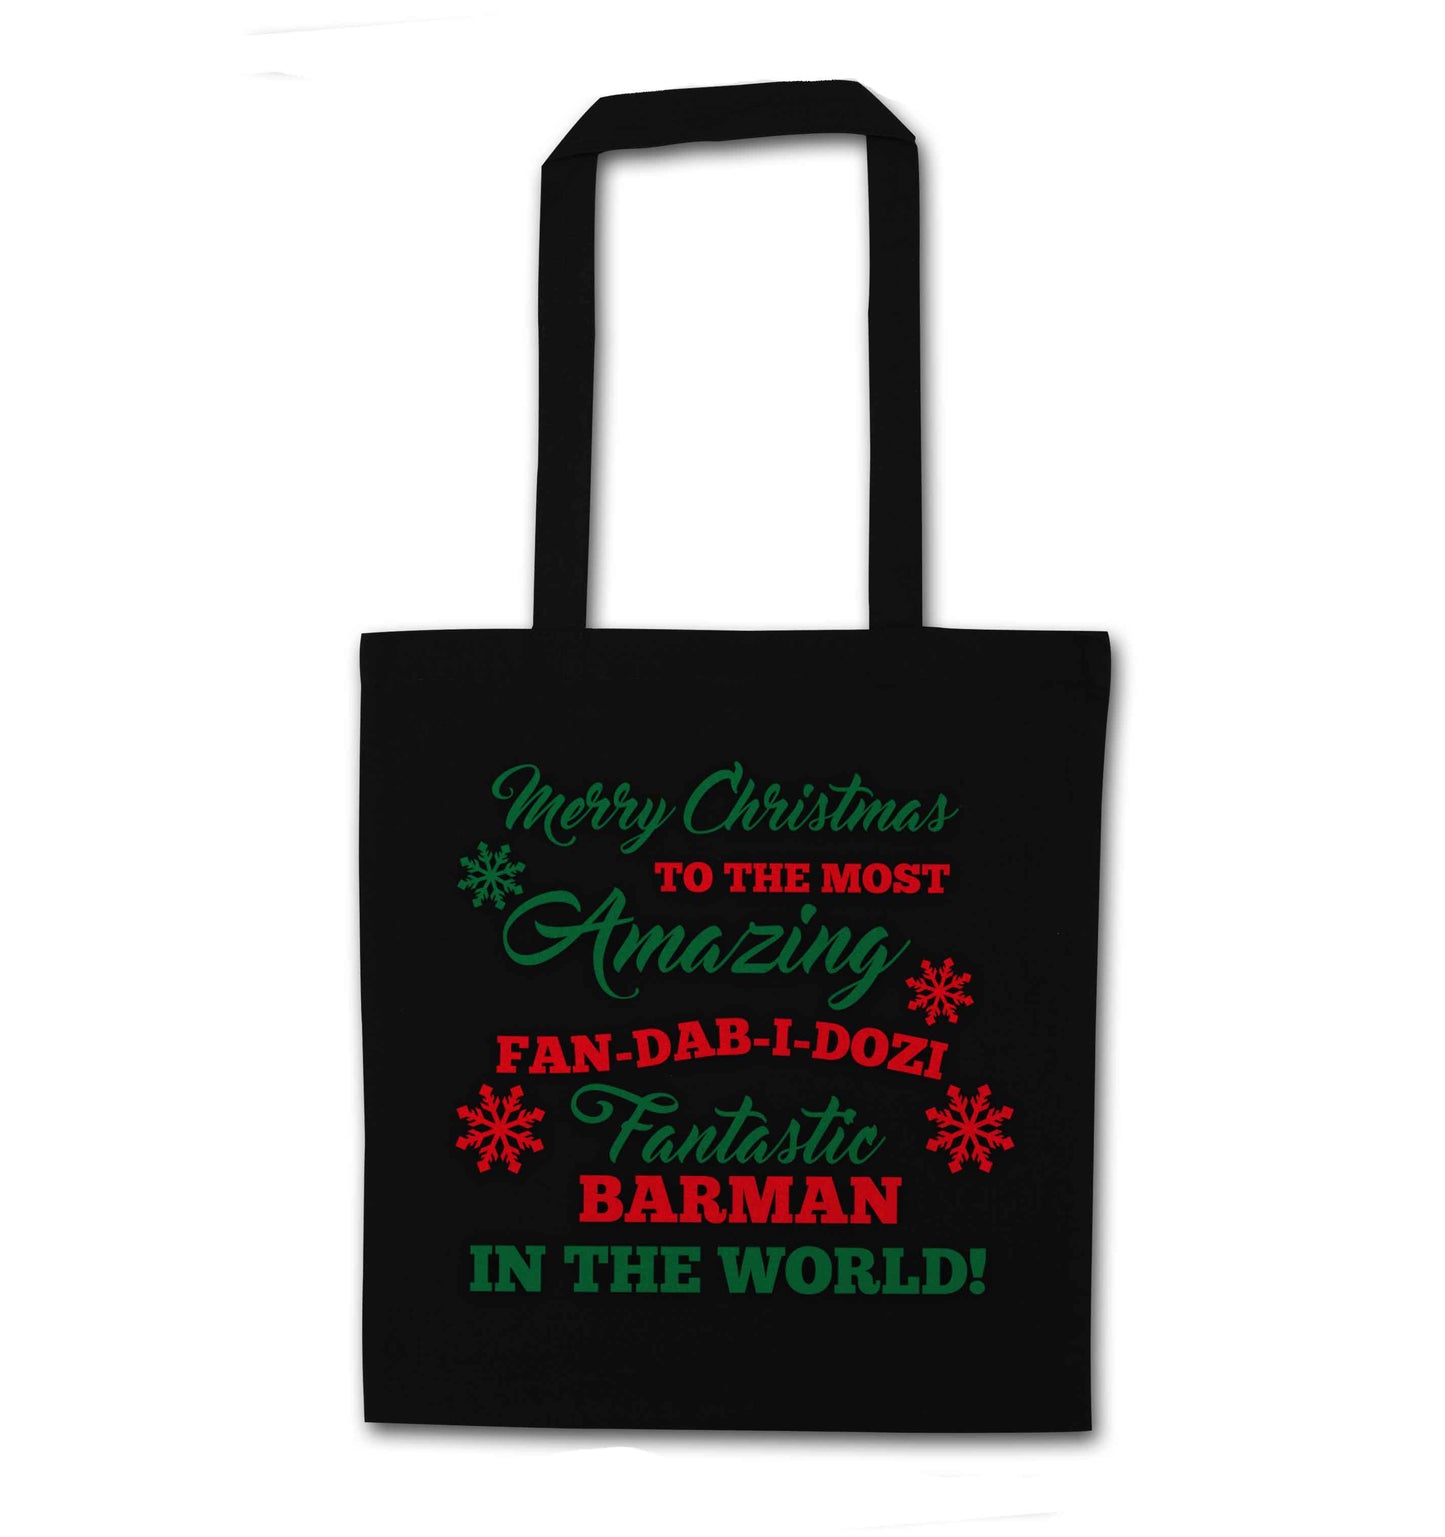 Merry Christmas to the most amazing barman in the world! black tote bag